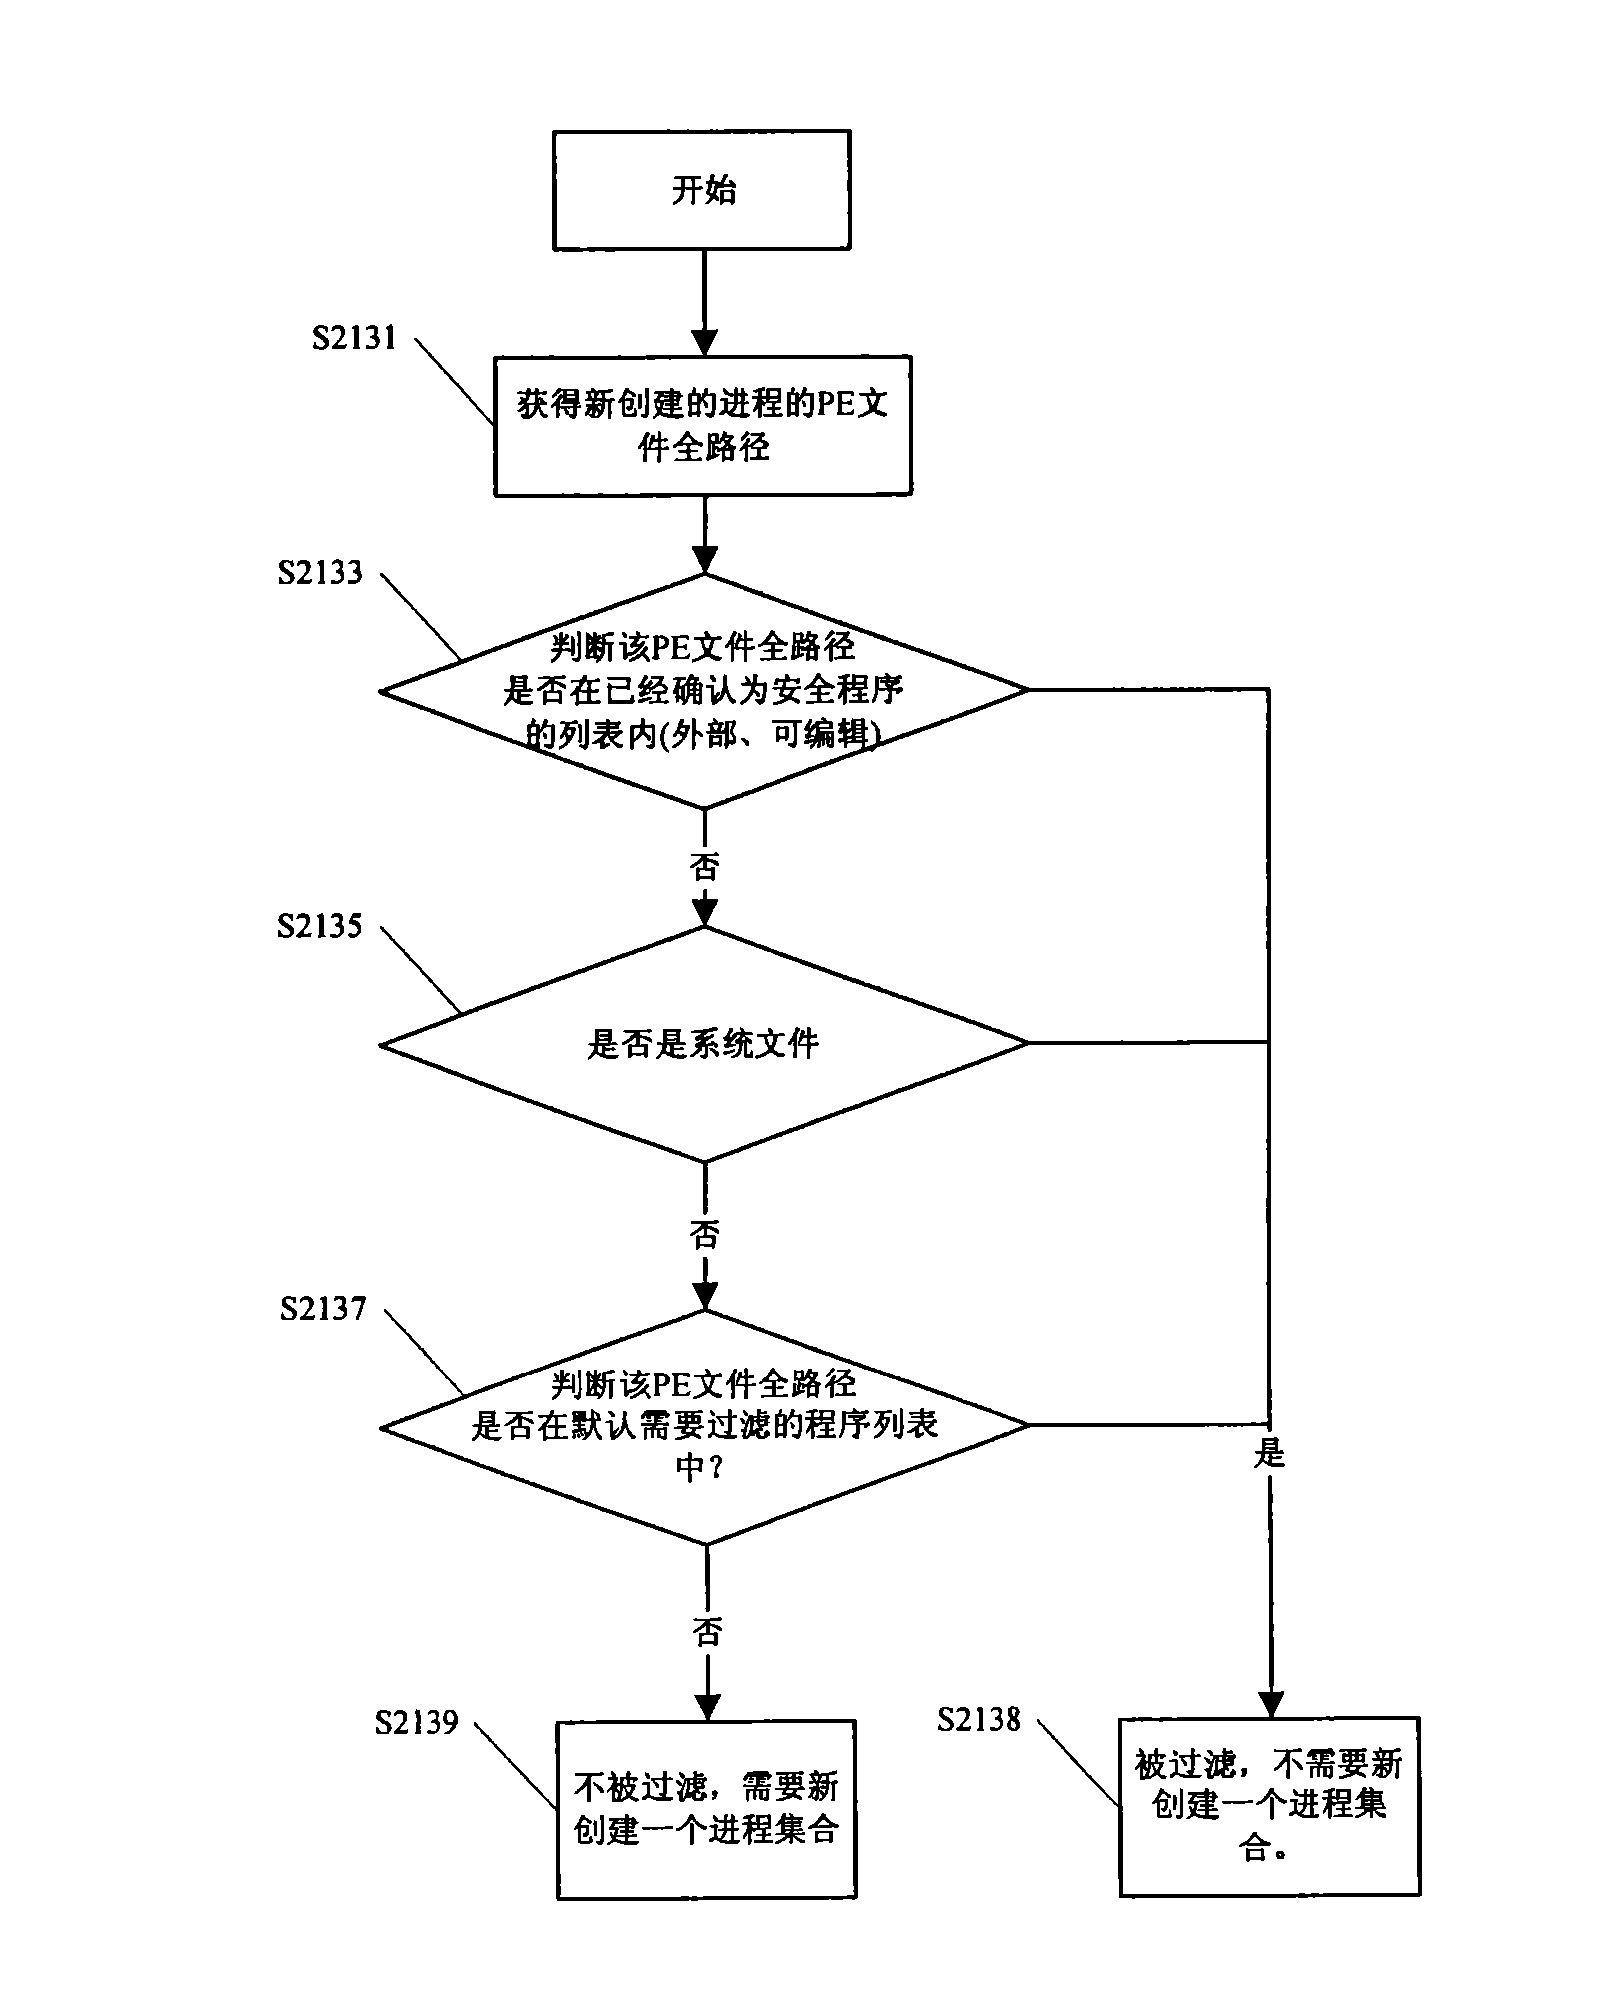 Method and apparatus for discovering malignancy of computer program